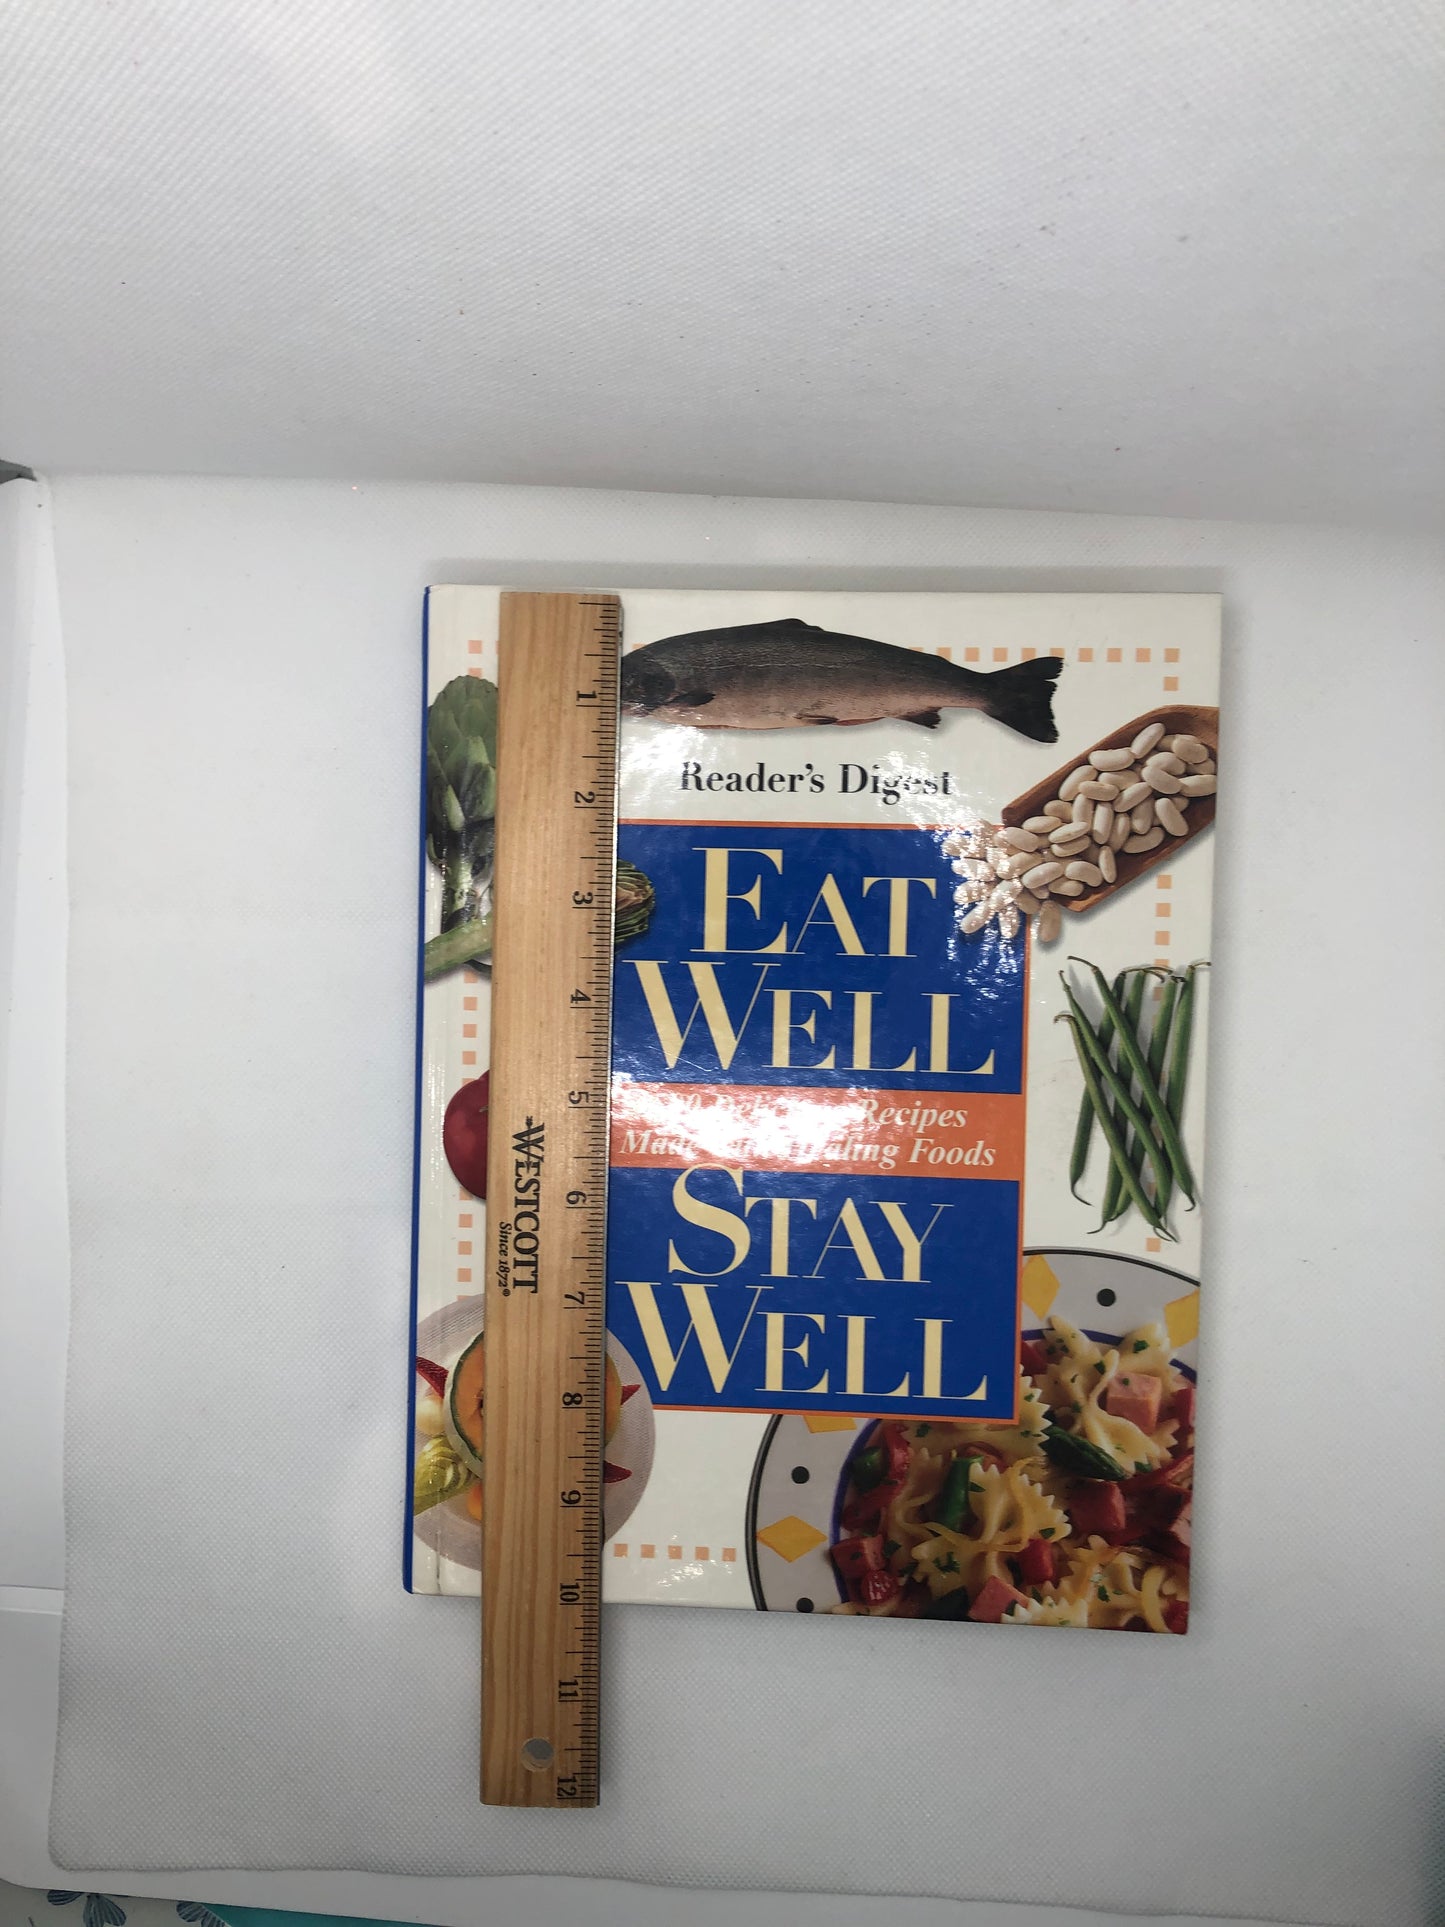 Reader's Digest - Eat Well Stay Well (in hardcover)